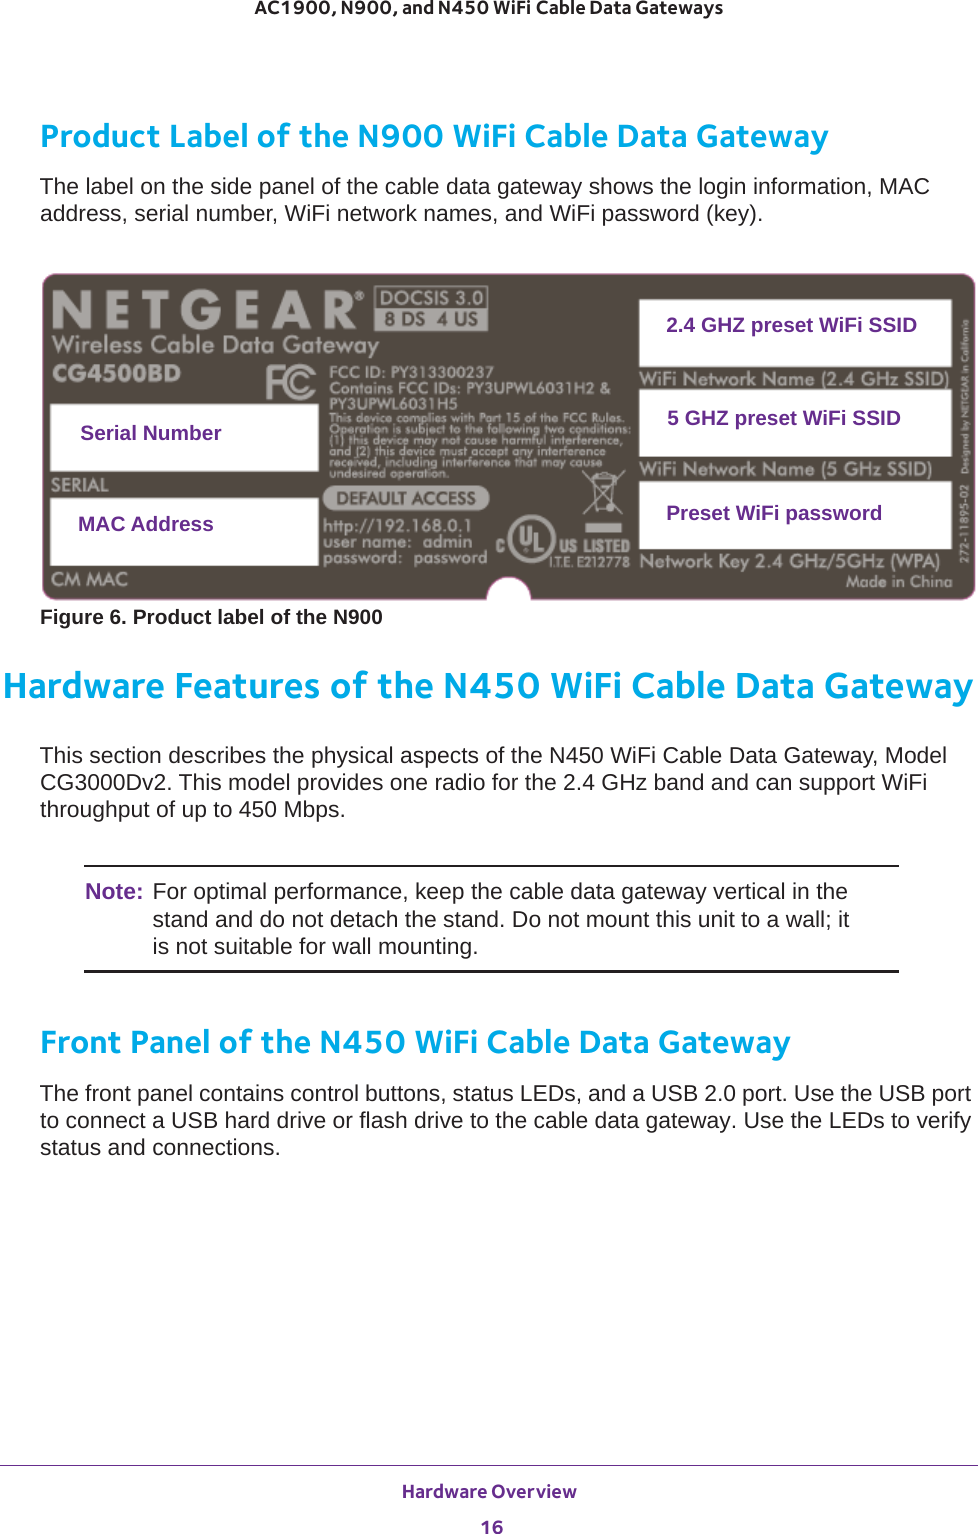 Hardware Overview 16AC1900, N900, and N450 WiFi Cable Data Gateways Product Label of the N900 WiFi Cable Data GatewayThe label on the side panel of the cable data gateway shows the login information, MAC address, serial number, WiFi network names, and WiFi password (key).Serial NumberMAC Address2.4 GHZ preset WiFi SSID5 GHZ preset WiFi SSIDPreset WiFi passwordFigure 6. Product label of the N900Hardware Features of the N450 WiFi Cable Data GatewayThis section describes the physical aspects of the N450 WiFi Cable Data Gateway, Model CG3000Dv2. This model provides one radio for the 2.4 GHz band and can support WiFi throughput of up to 450 Mbps.Note: For optimal performance, keep the cable data gateway vertical in the stand and do not detach the stand. Do not mount this unit to a wall; it is not suitable for wall mounting.Front Panel of the N450 WiFi Cable Data GatewayThe front panel contains control buttons, status LEDs, and a USB 2.0 port. Use the USB port to connect a USB hard drive or flash drive to the cable data gateway. Use the LEDs to verify status and connections. 